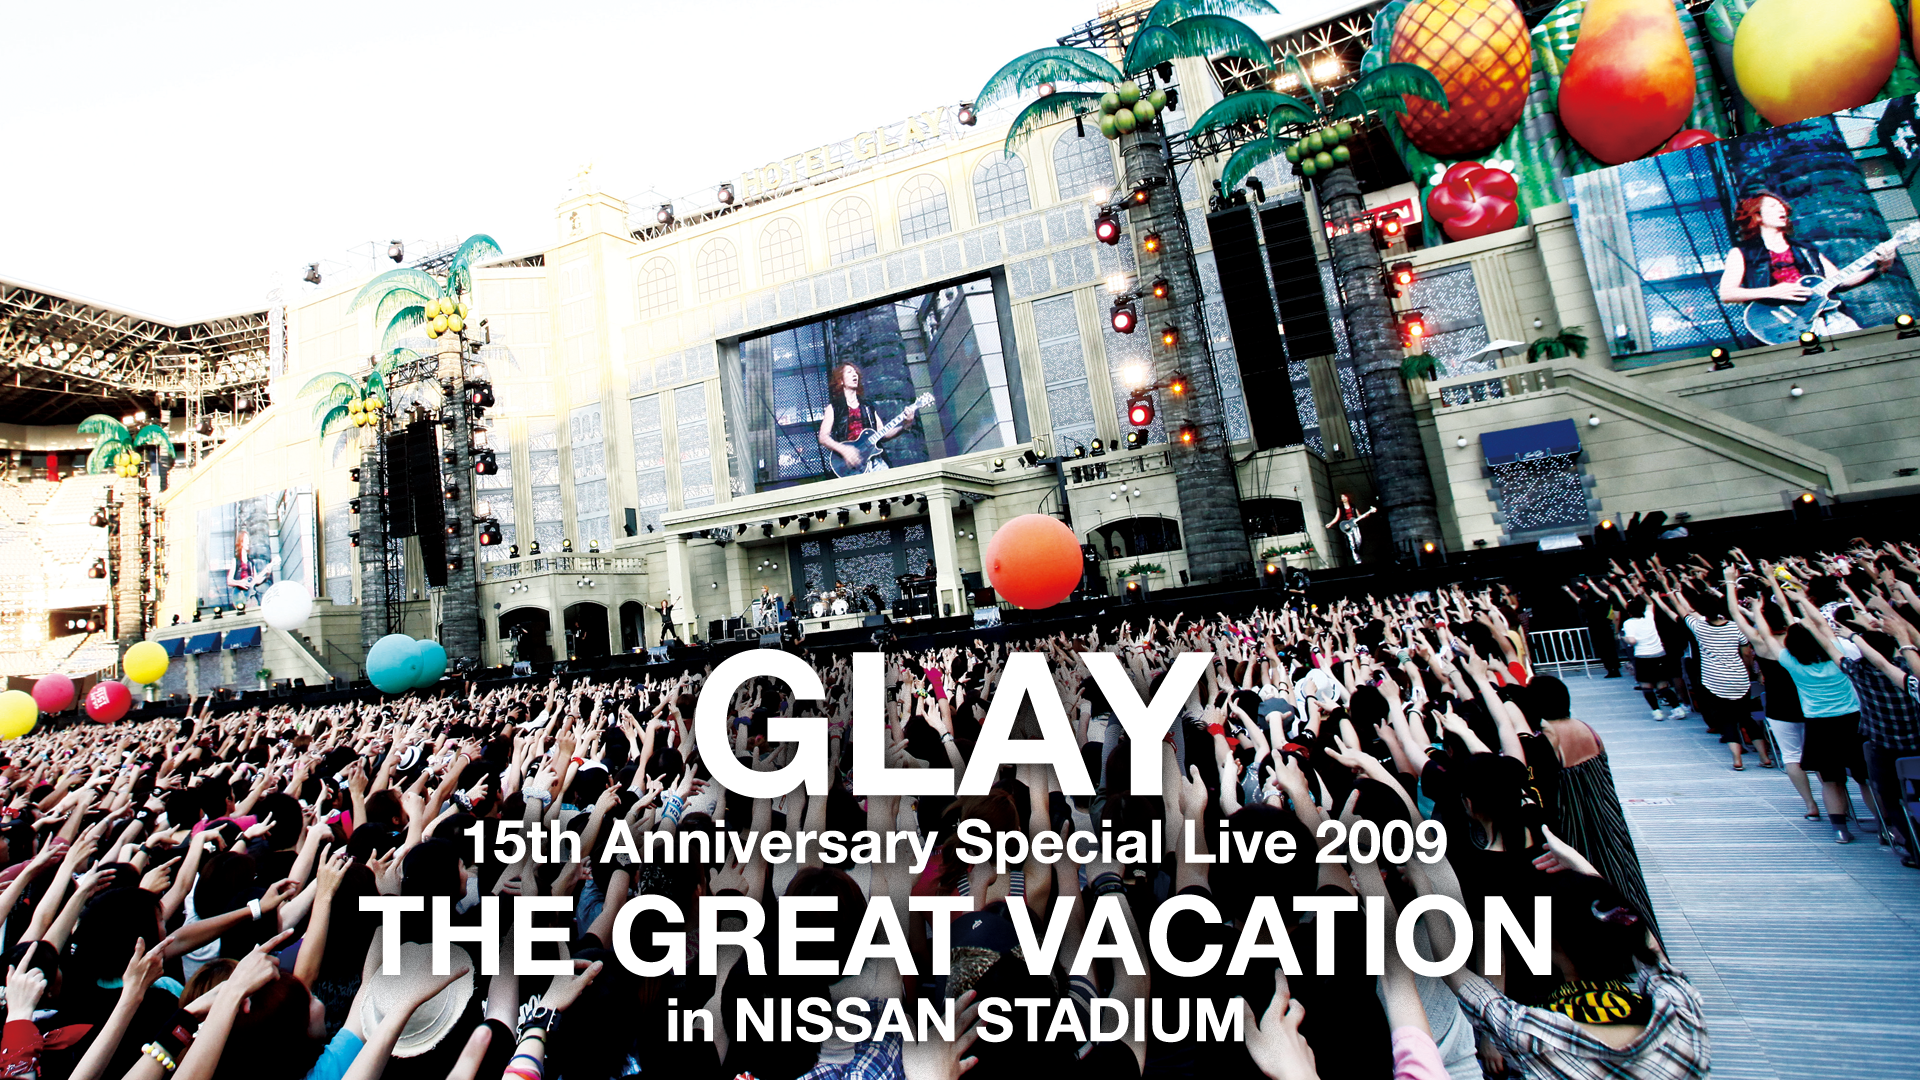 GLAY 15th Anniversary Special Live 2009 THE GREAT VACATION in NISSAN  STADIUM(音楽・ライブ / 2010) - 動画配信 | U-NEXT 31日間無料トライアル